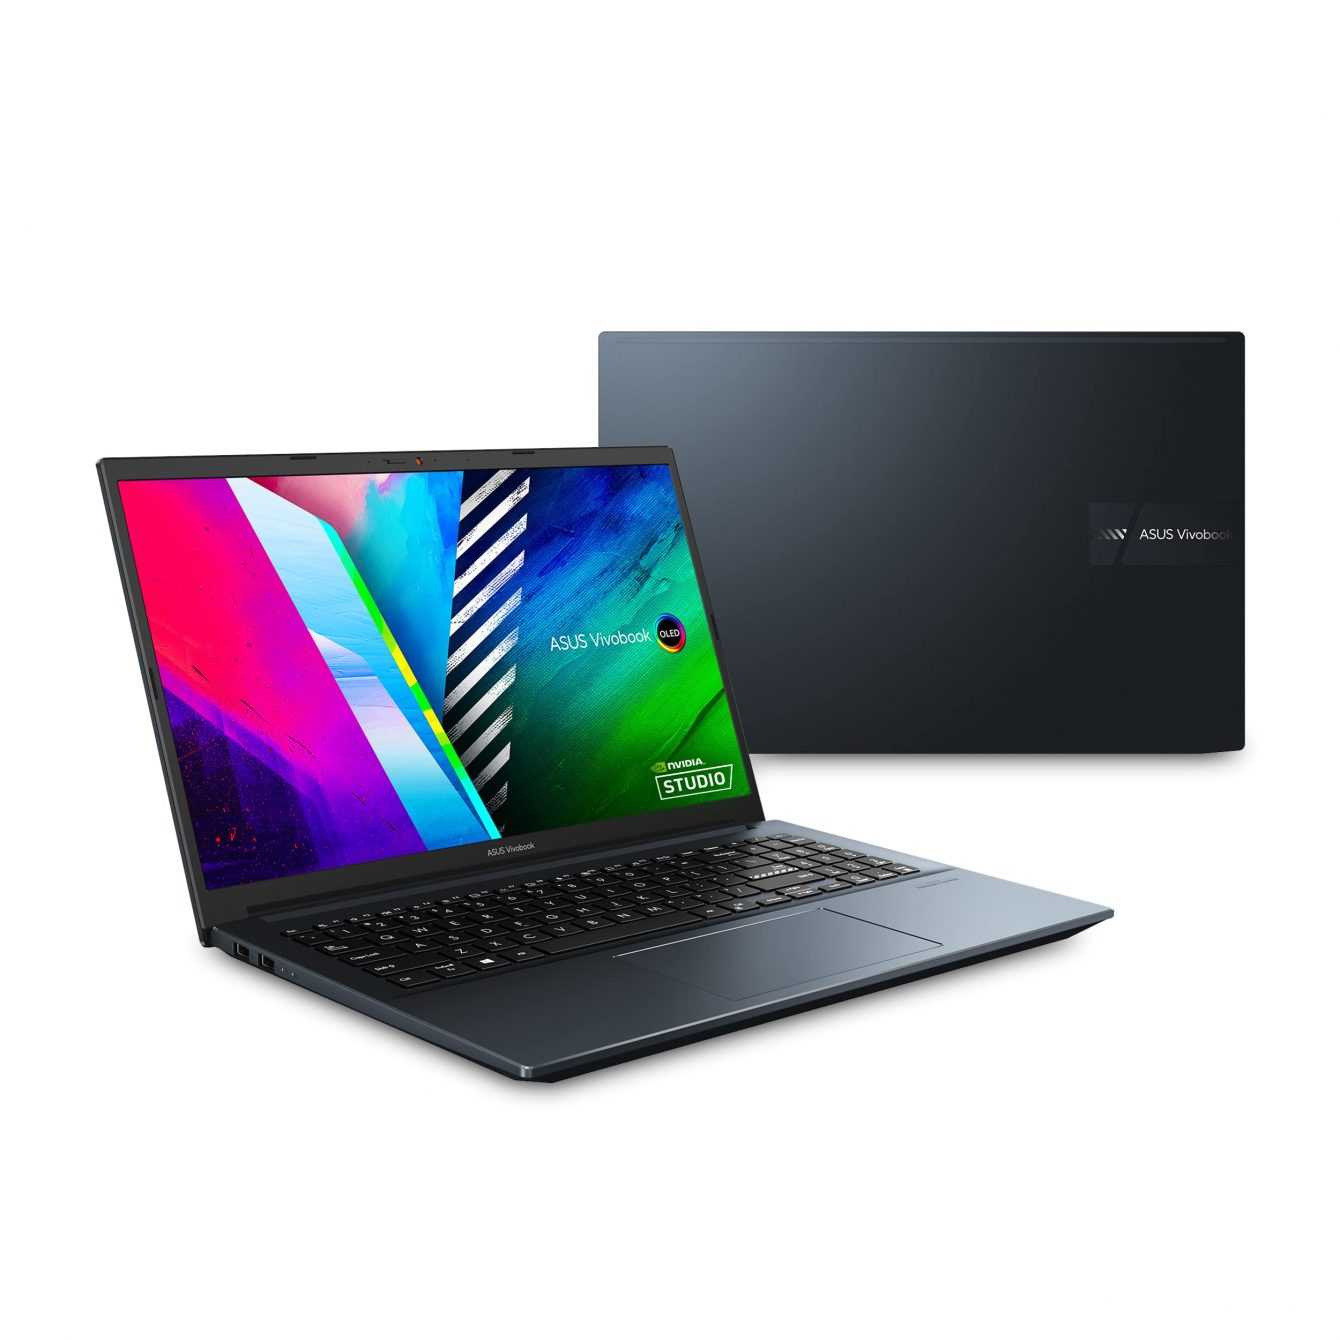 AMD-powered laptops: choose the right gift for Christmas 2022